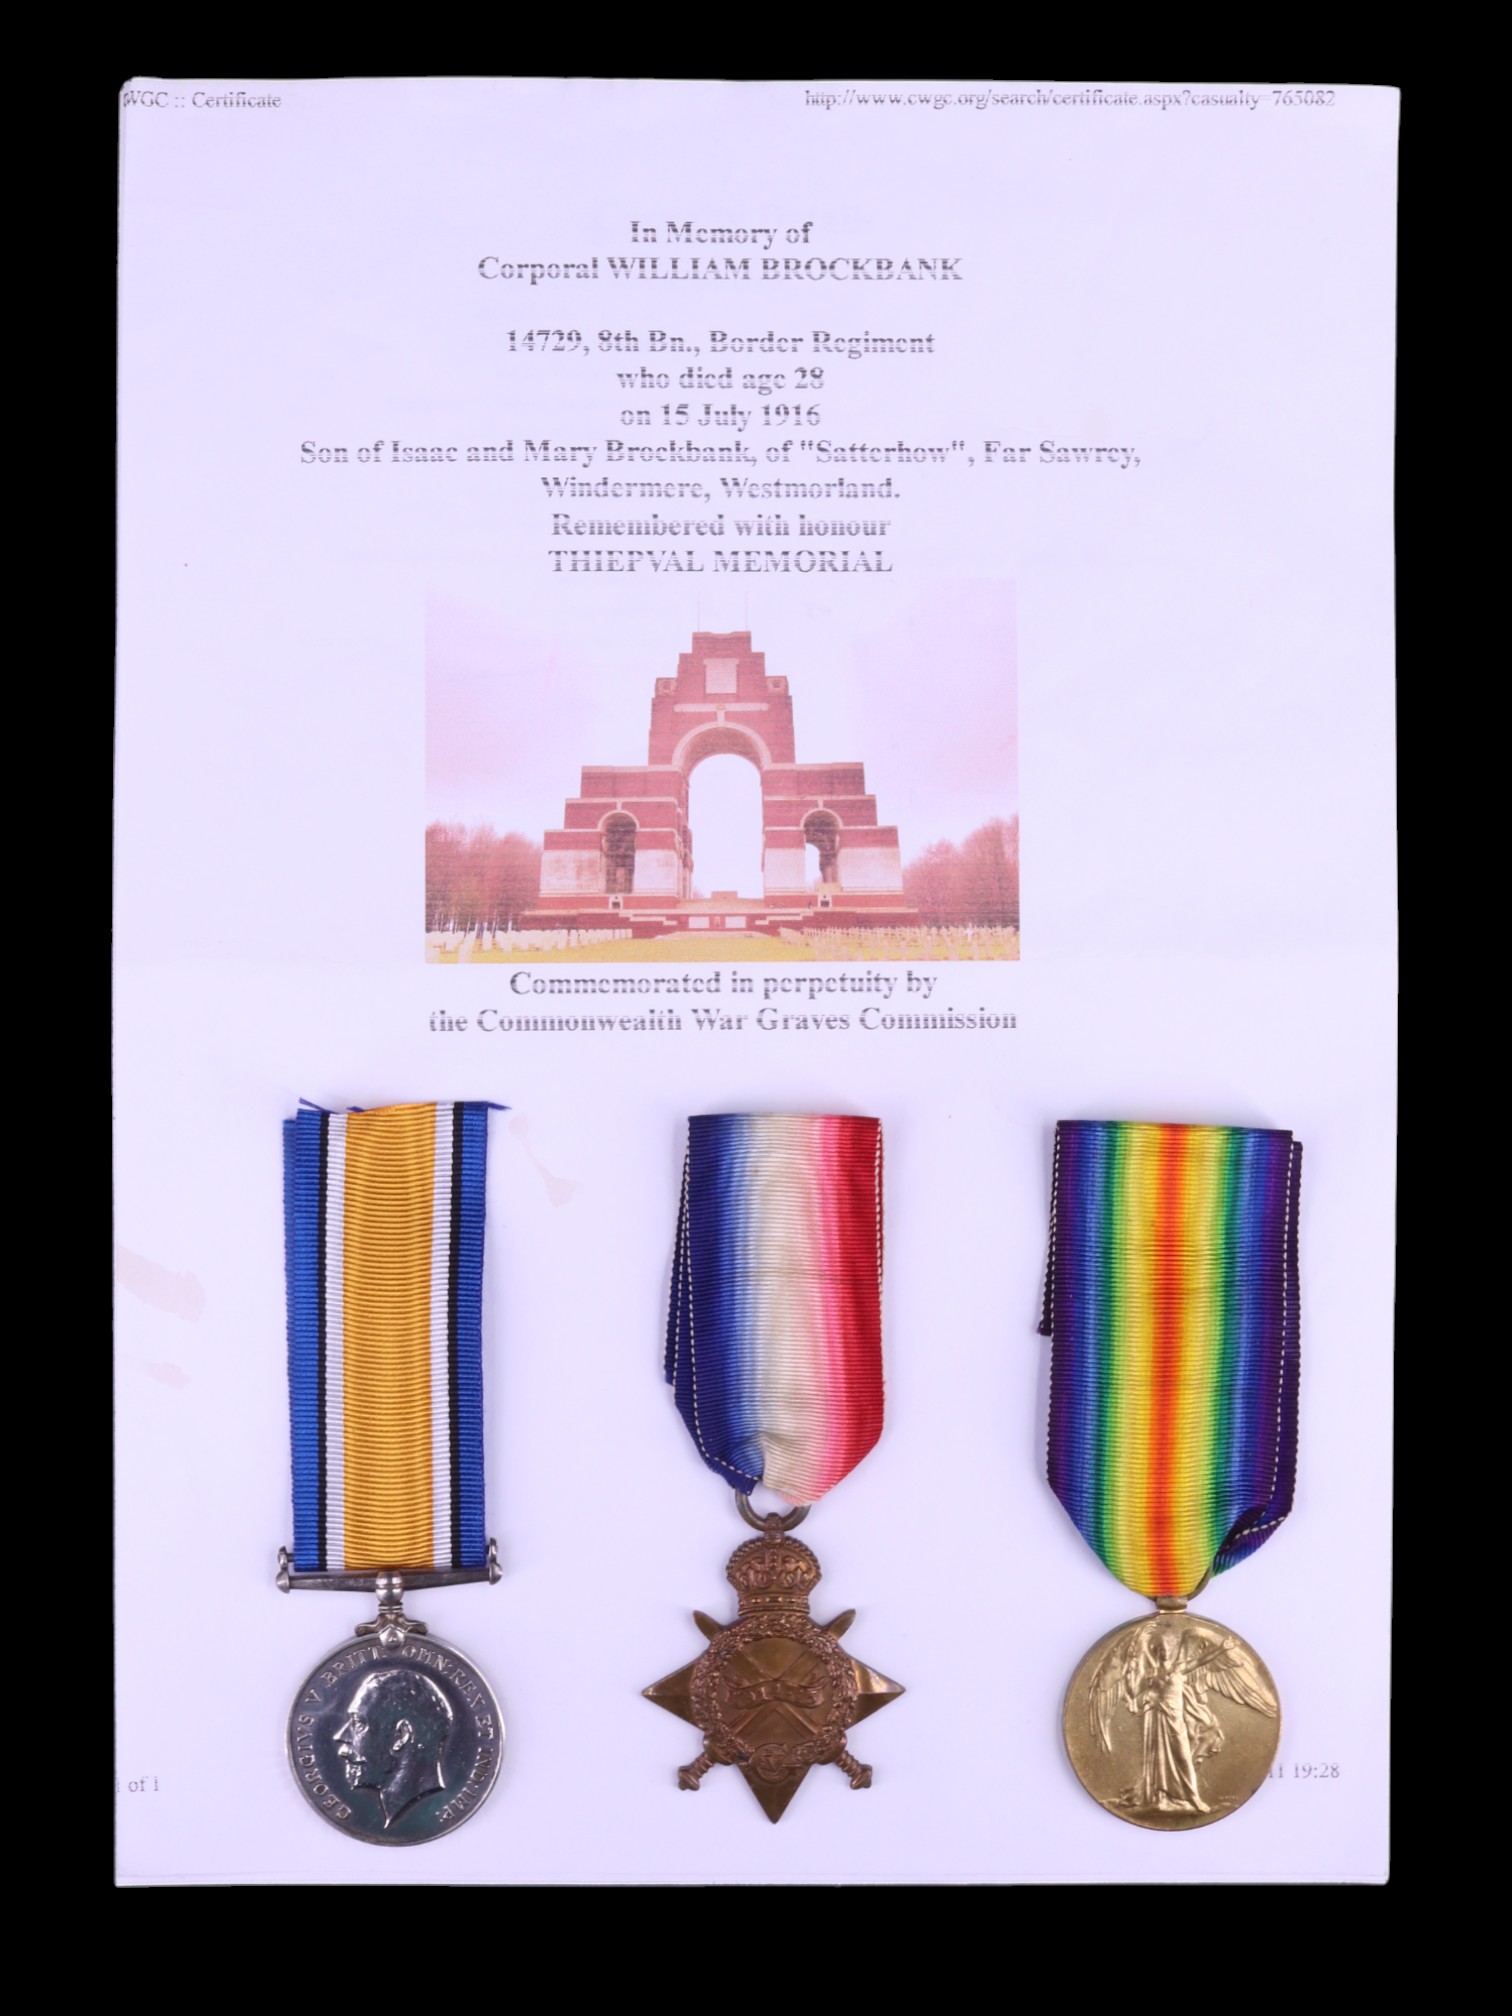 A 1914-15 Star, British War and Victory medals to 14729 Acting Corporal William Brockbanks, Border